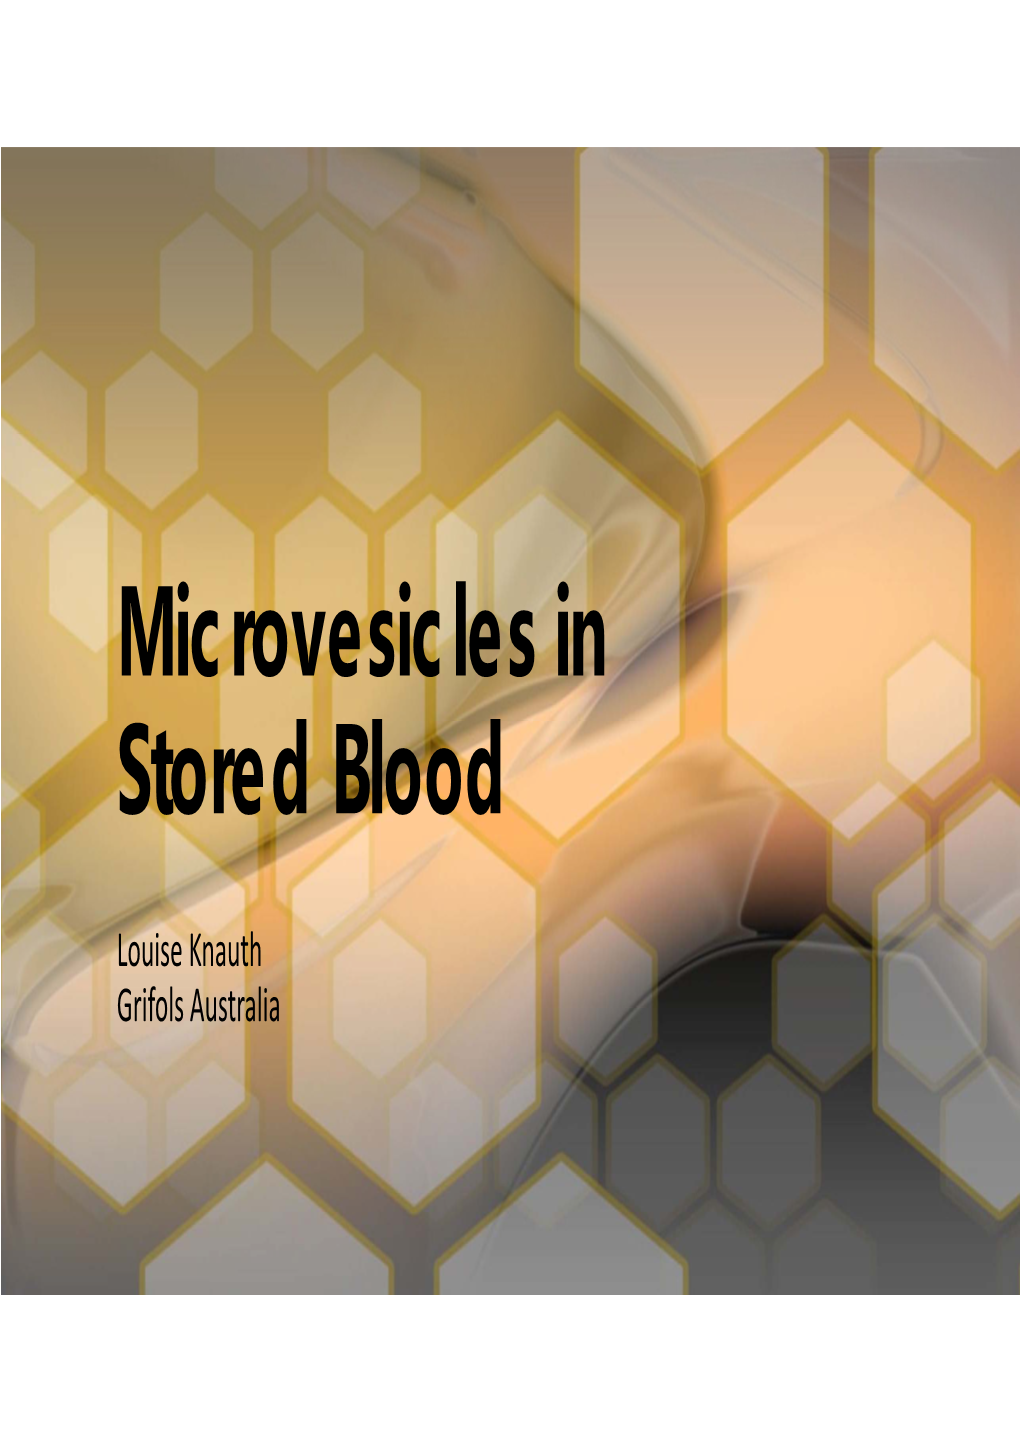 Microvesicles in Stored Blood